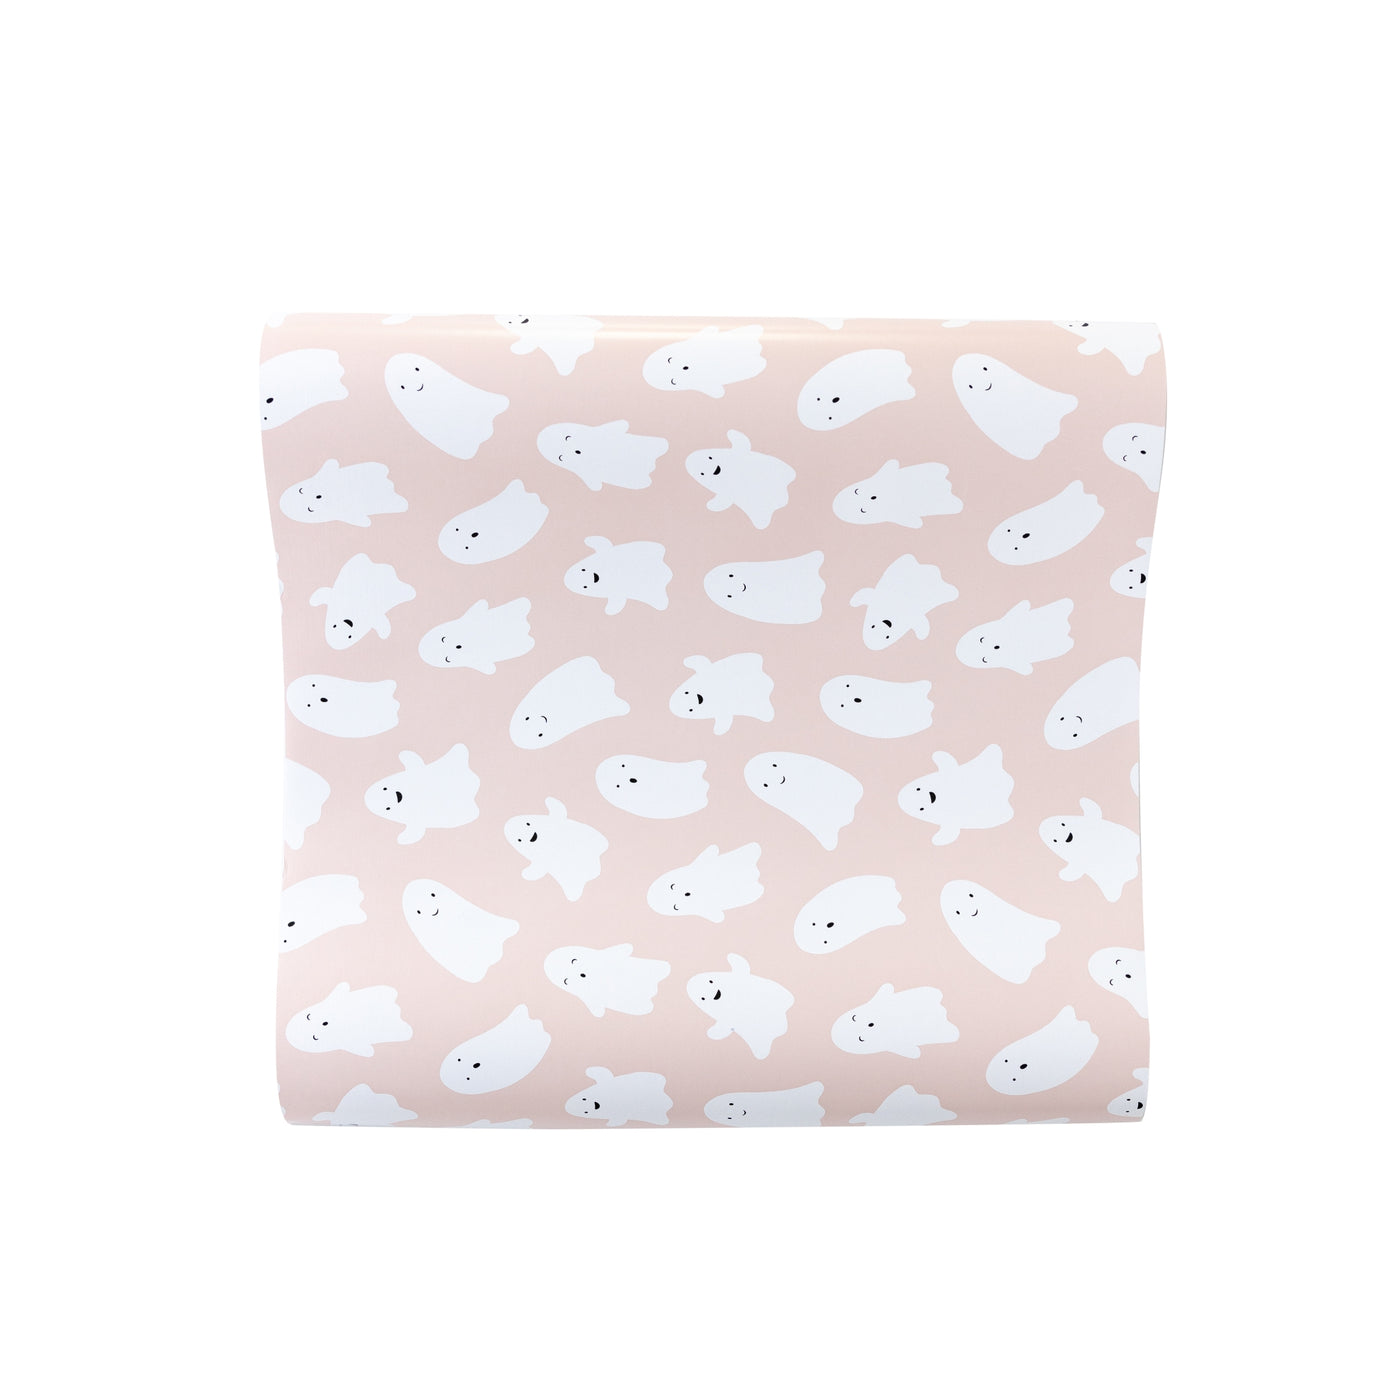 PLTBR82 -  Pink Ghosts Paper Table Runner